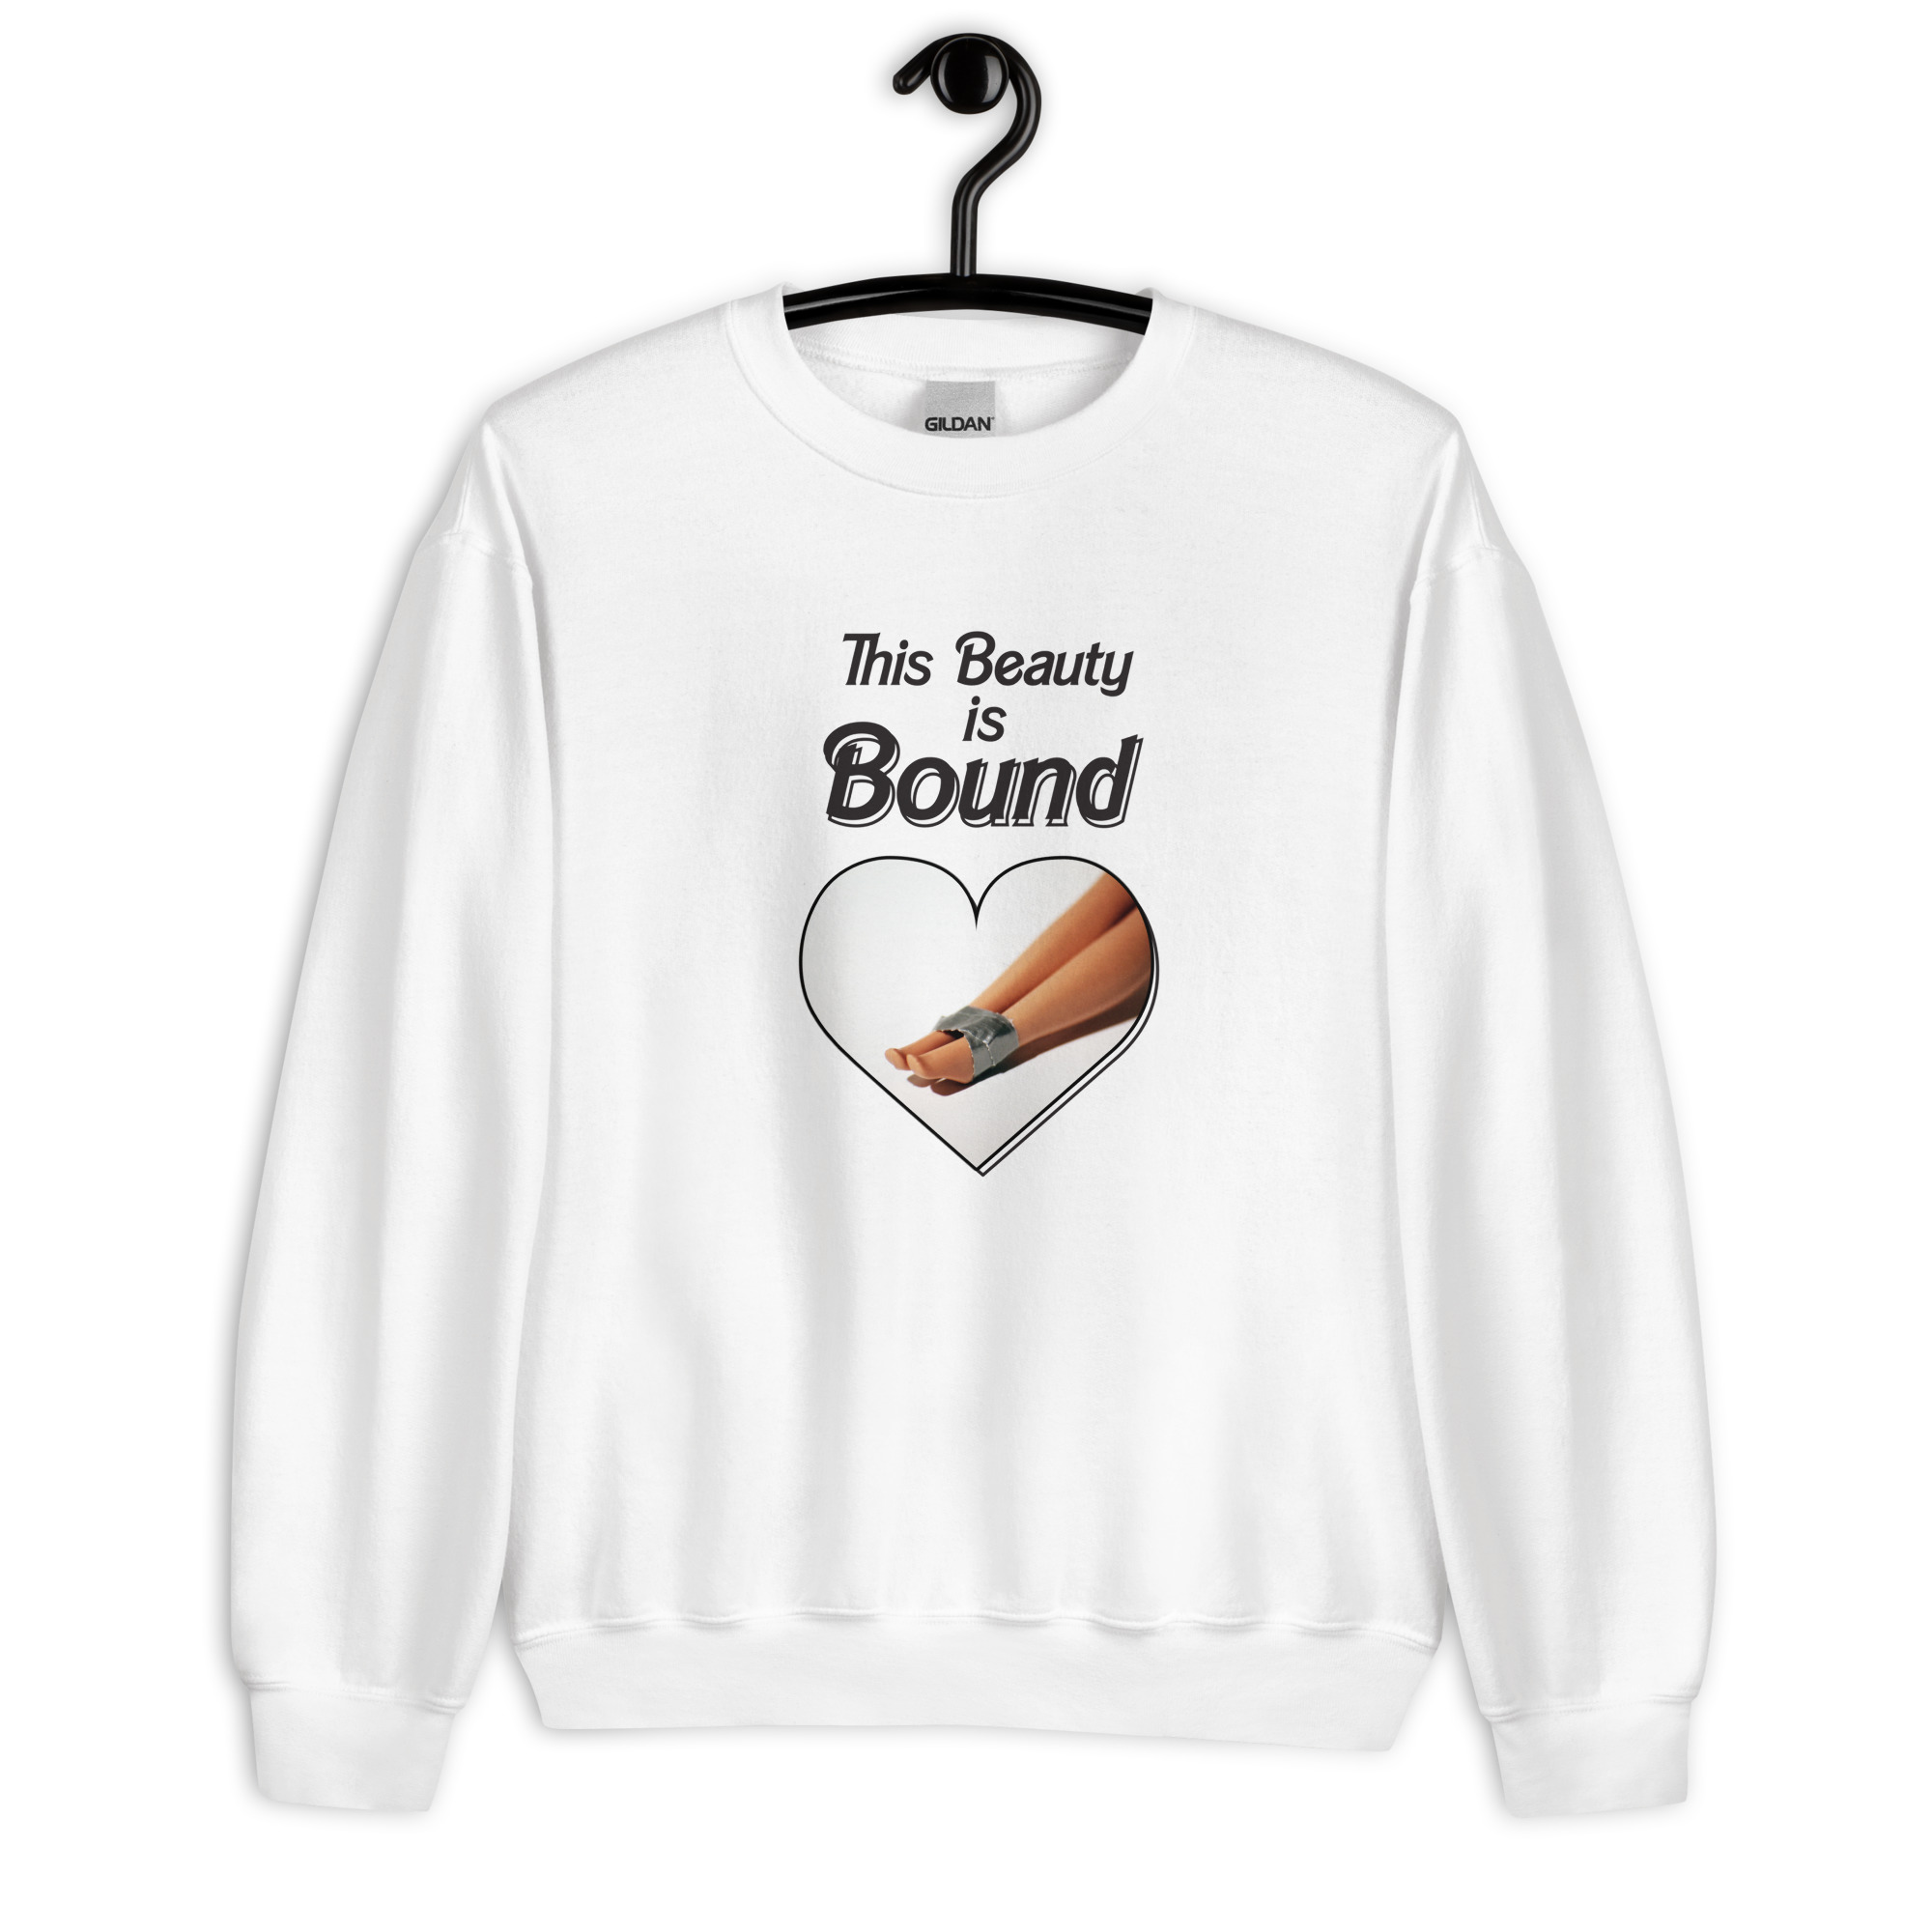 This Beauty is Bound sweatshirt by Wilde Designs